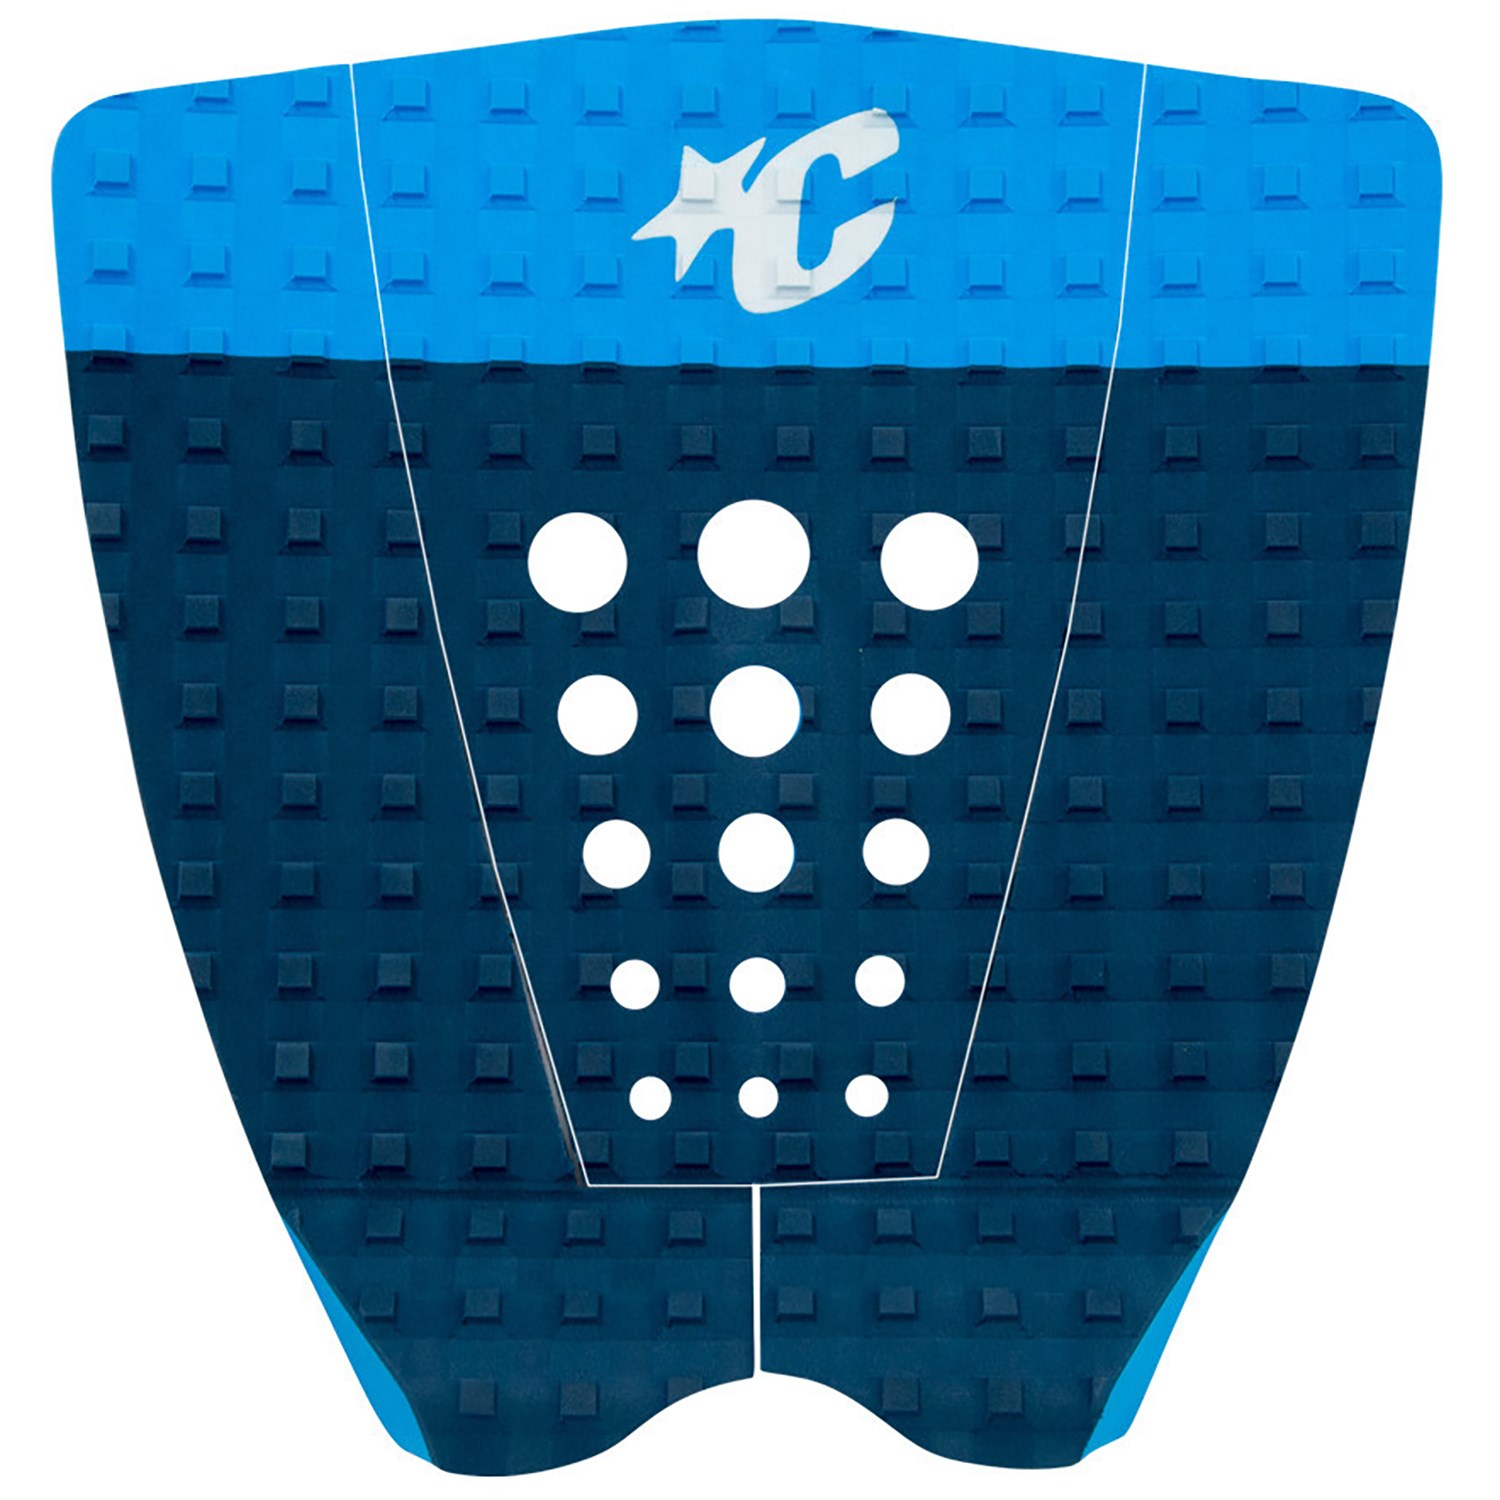 Creatures of Leisue Mitch Coleborn Traction Pad 